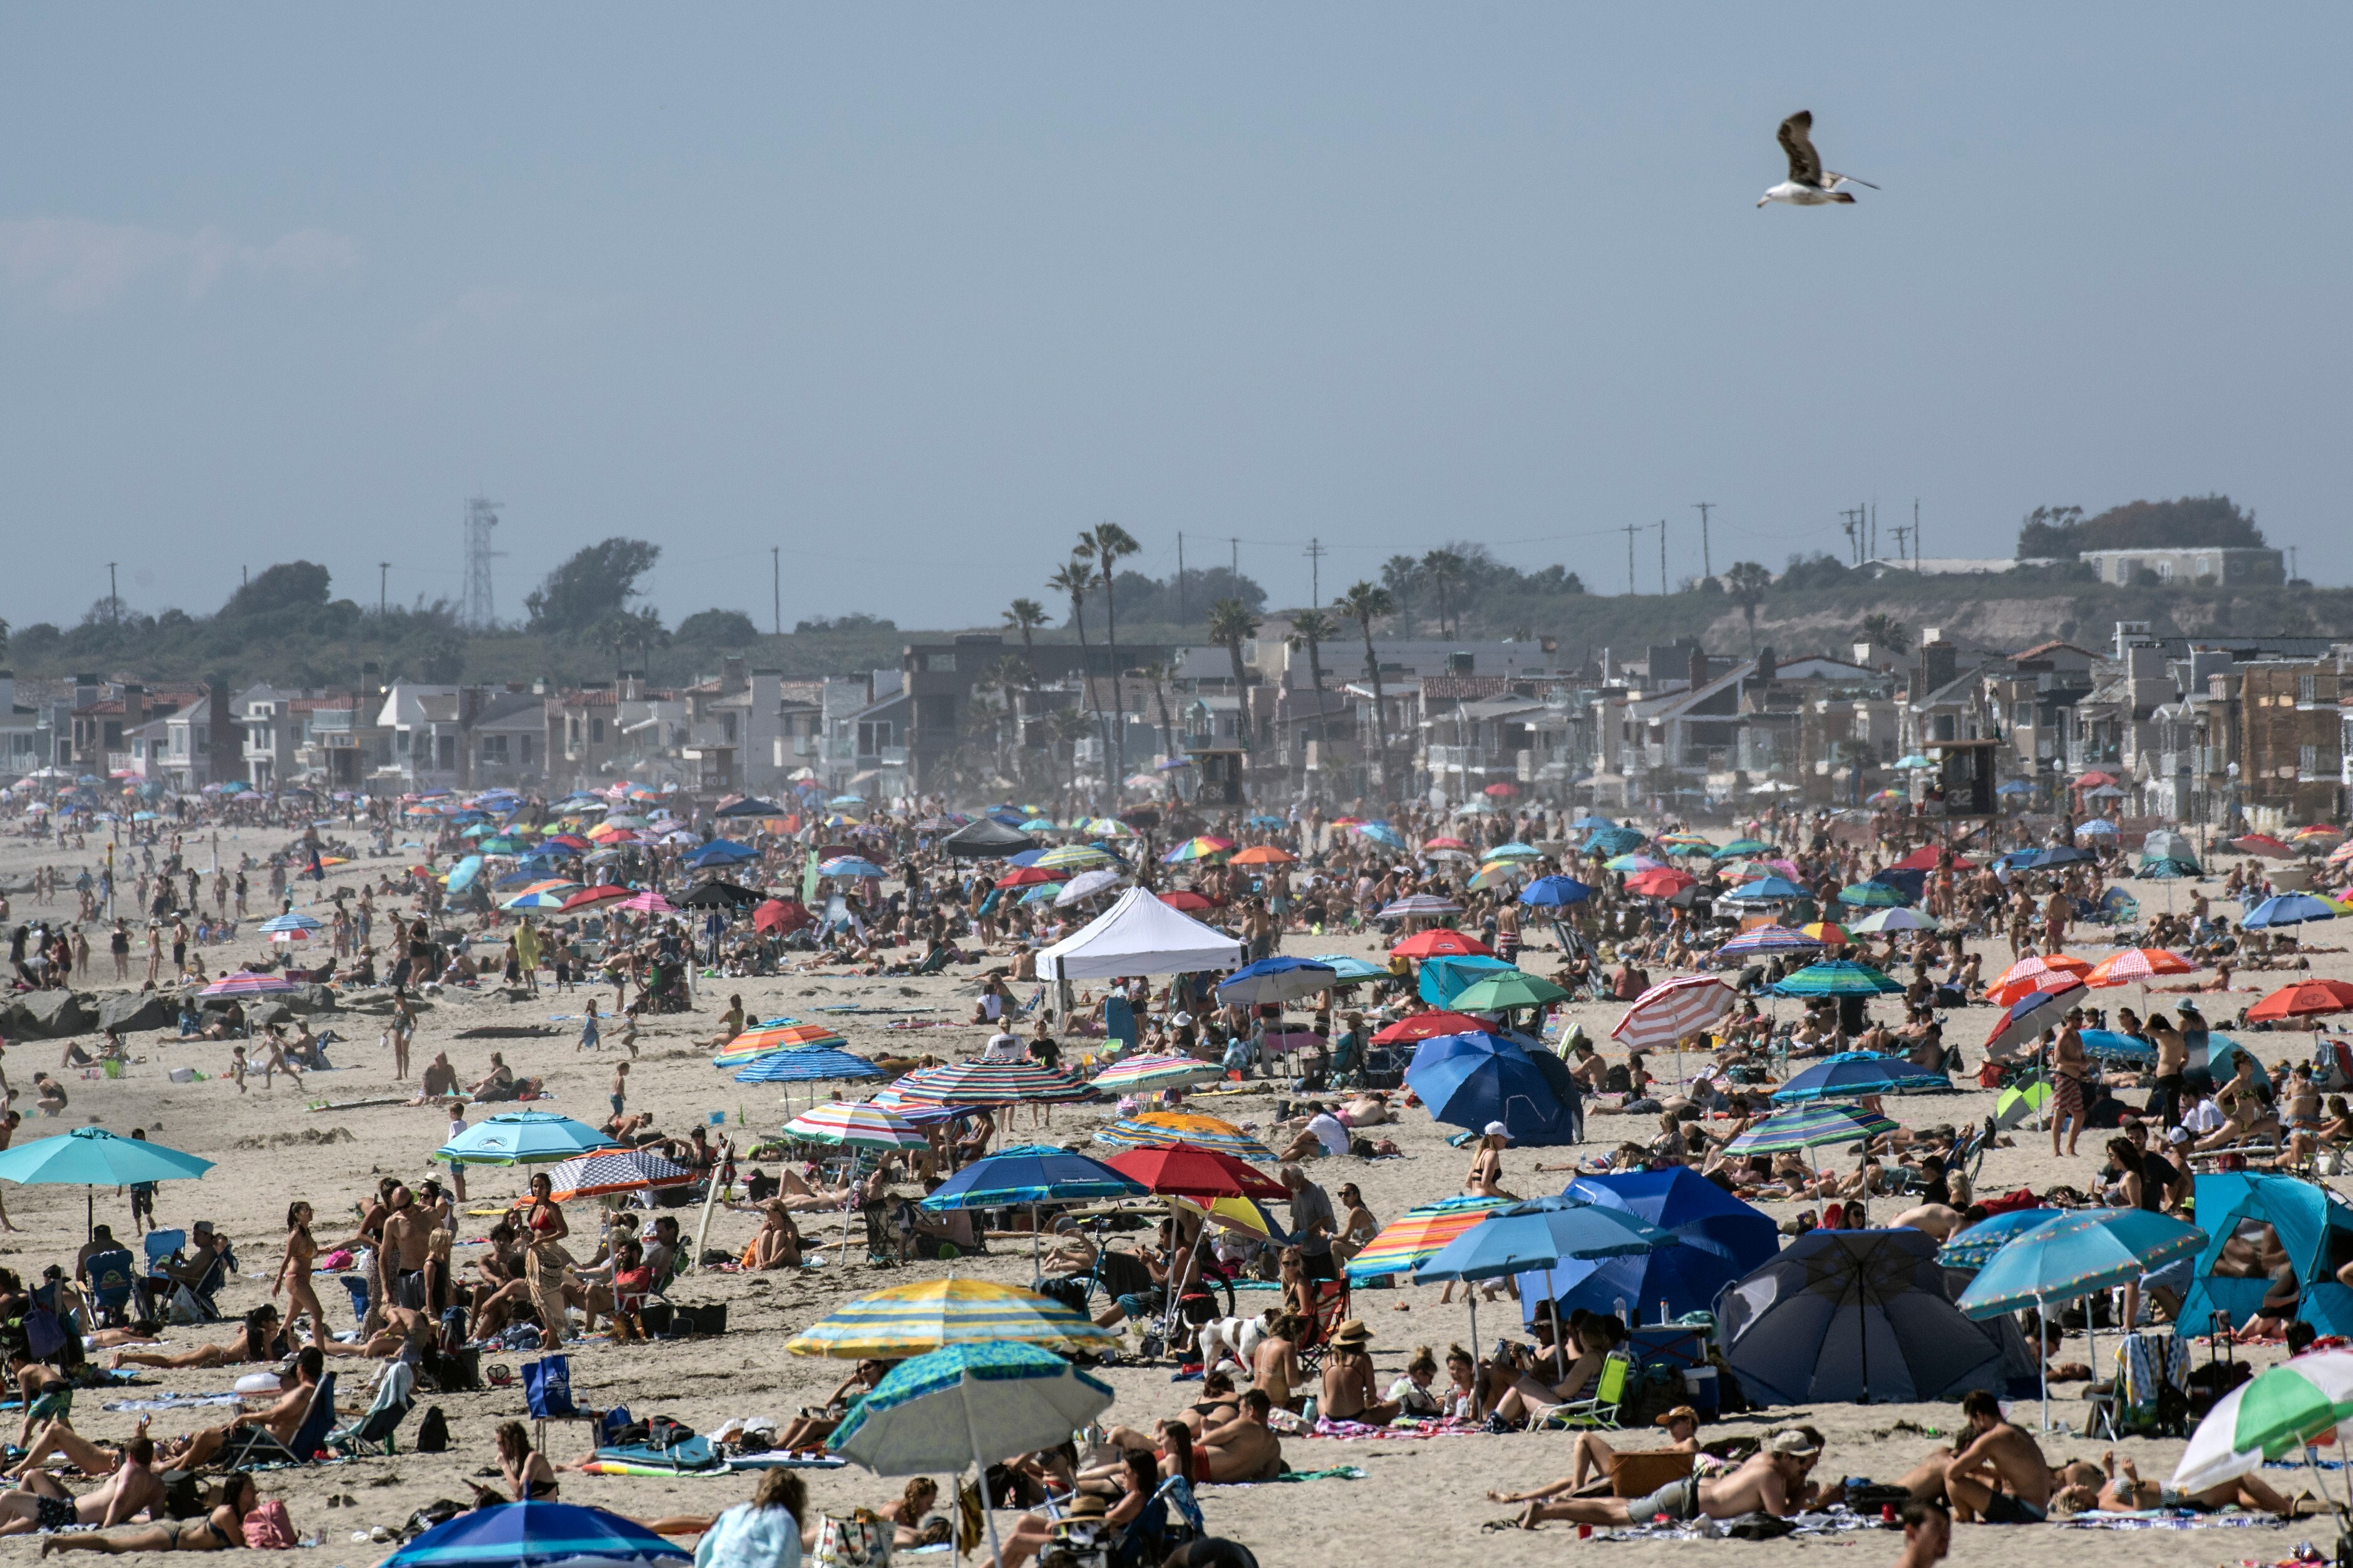 People gather at Newport Beach in California as a heatwave hits the area despite the stay-at-home order due to the coronavirus outbreak. Photo: Orange County Register via Zuma/dpa